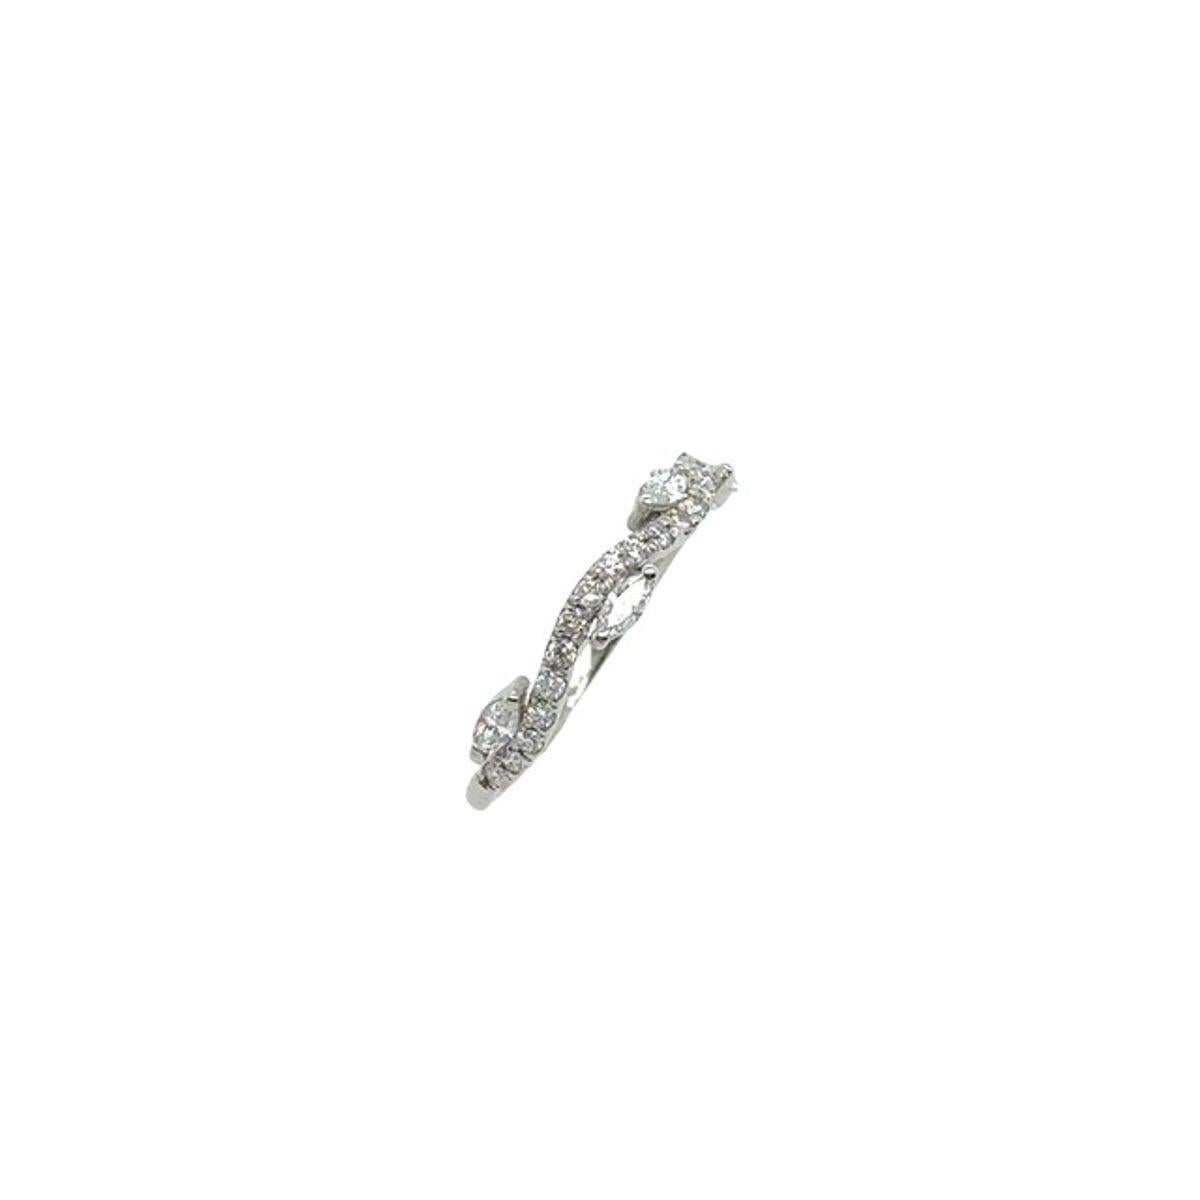 This Platinum Diamond half-eternity band is set with a mix of round and Marquise Diamonds, with a total Diamond weight of 0.55ct. This ring is elegant and beautiful for wedding ring or anniversary ring.

Additional Information:
Total Diamond Weight: